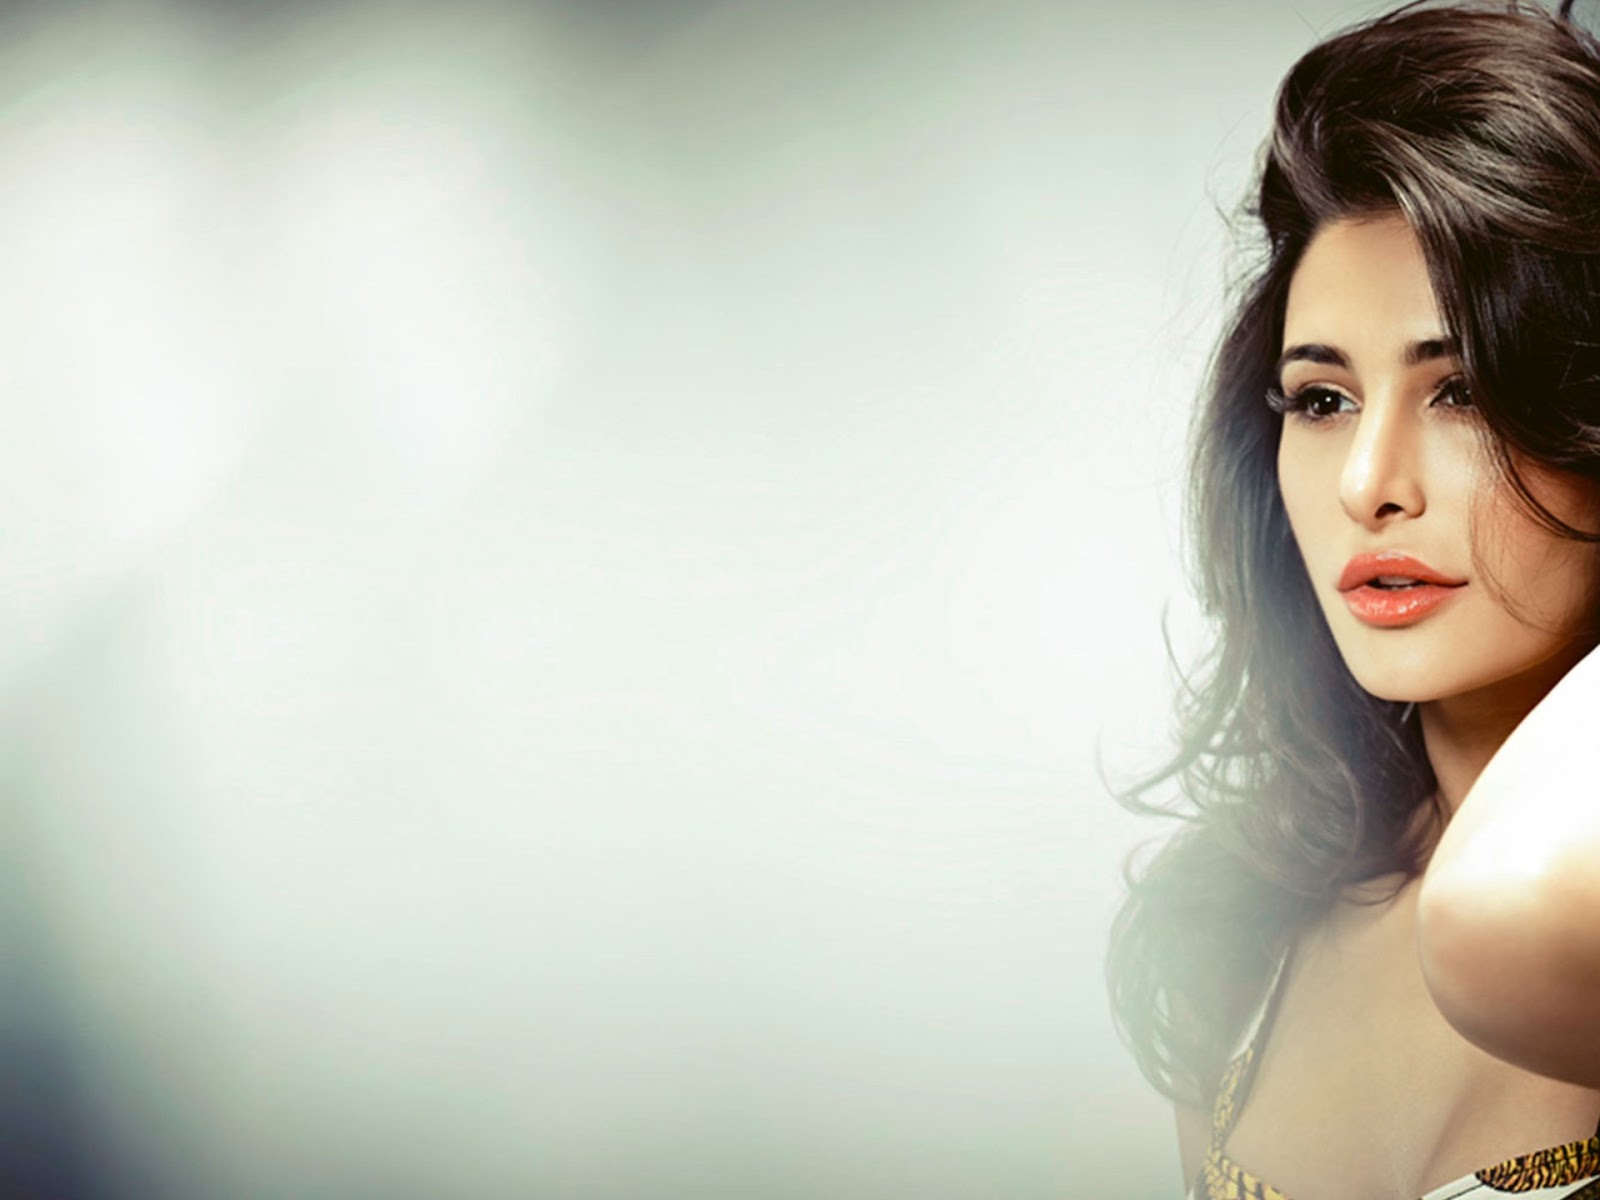 Nargis Fakhri Wallpapers High Resolution and Quality Download